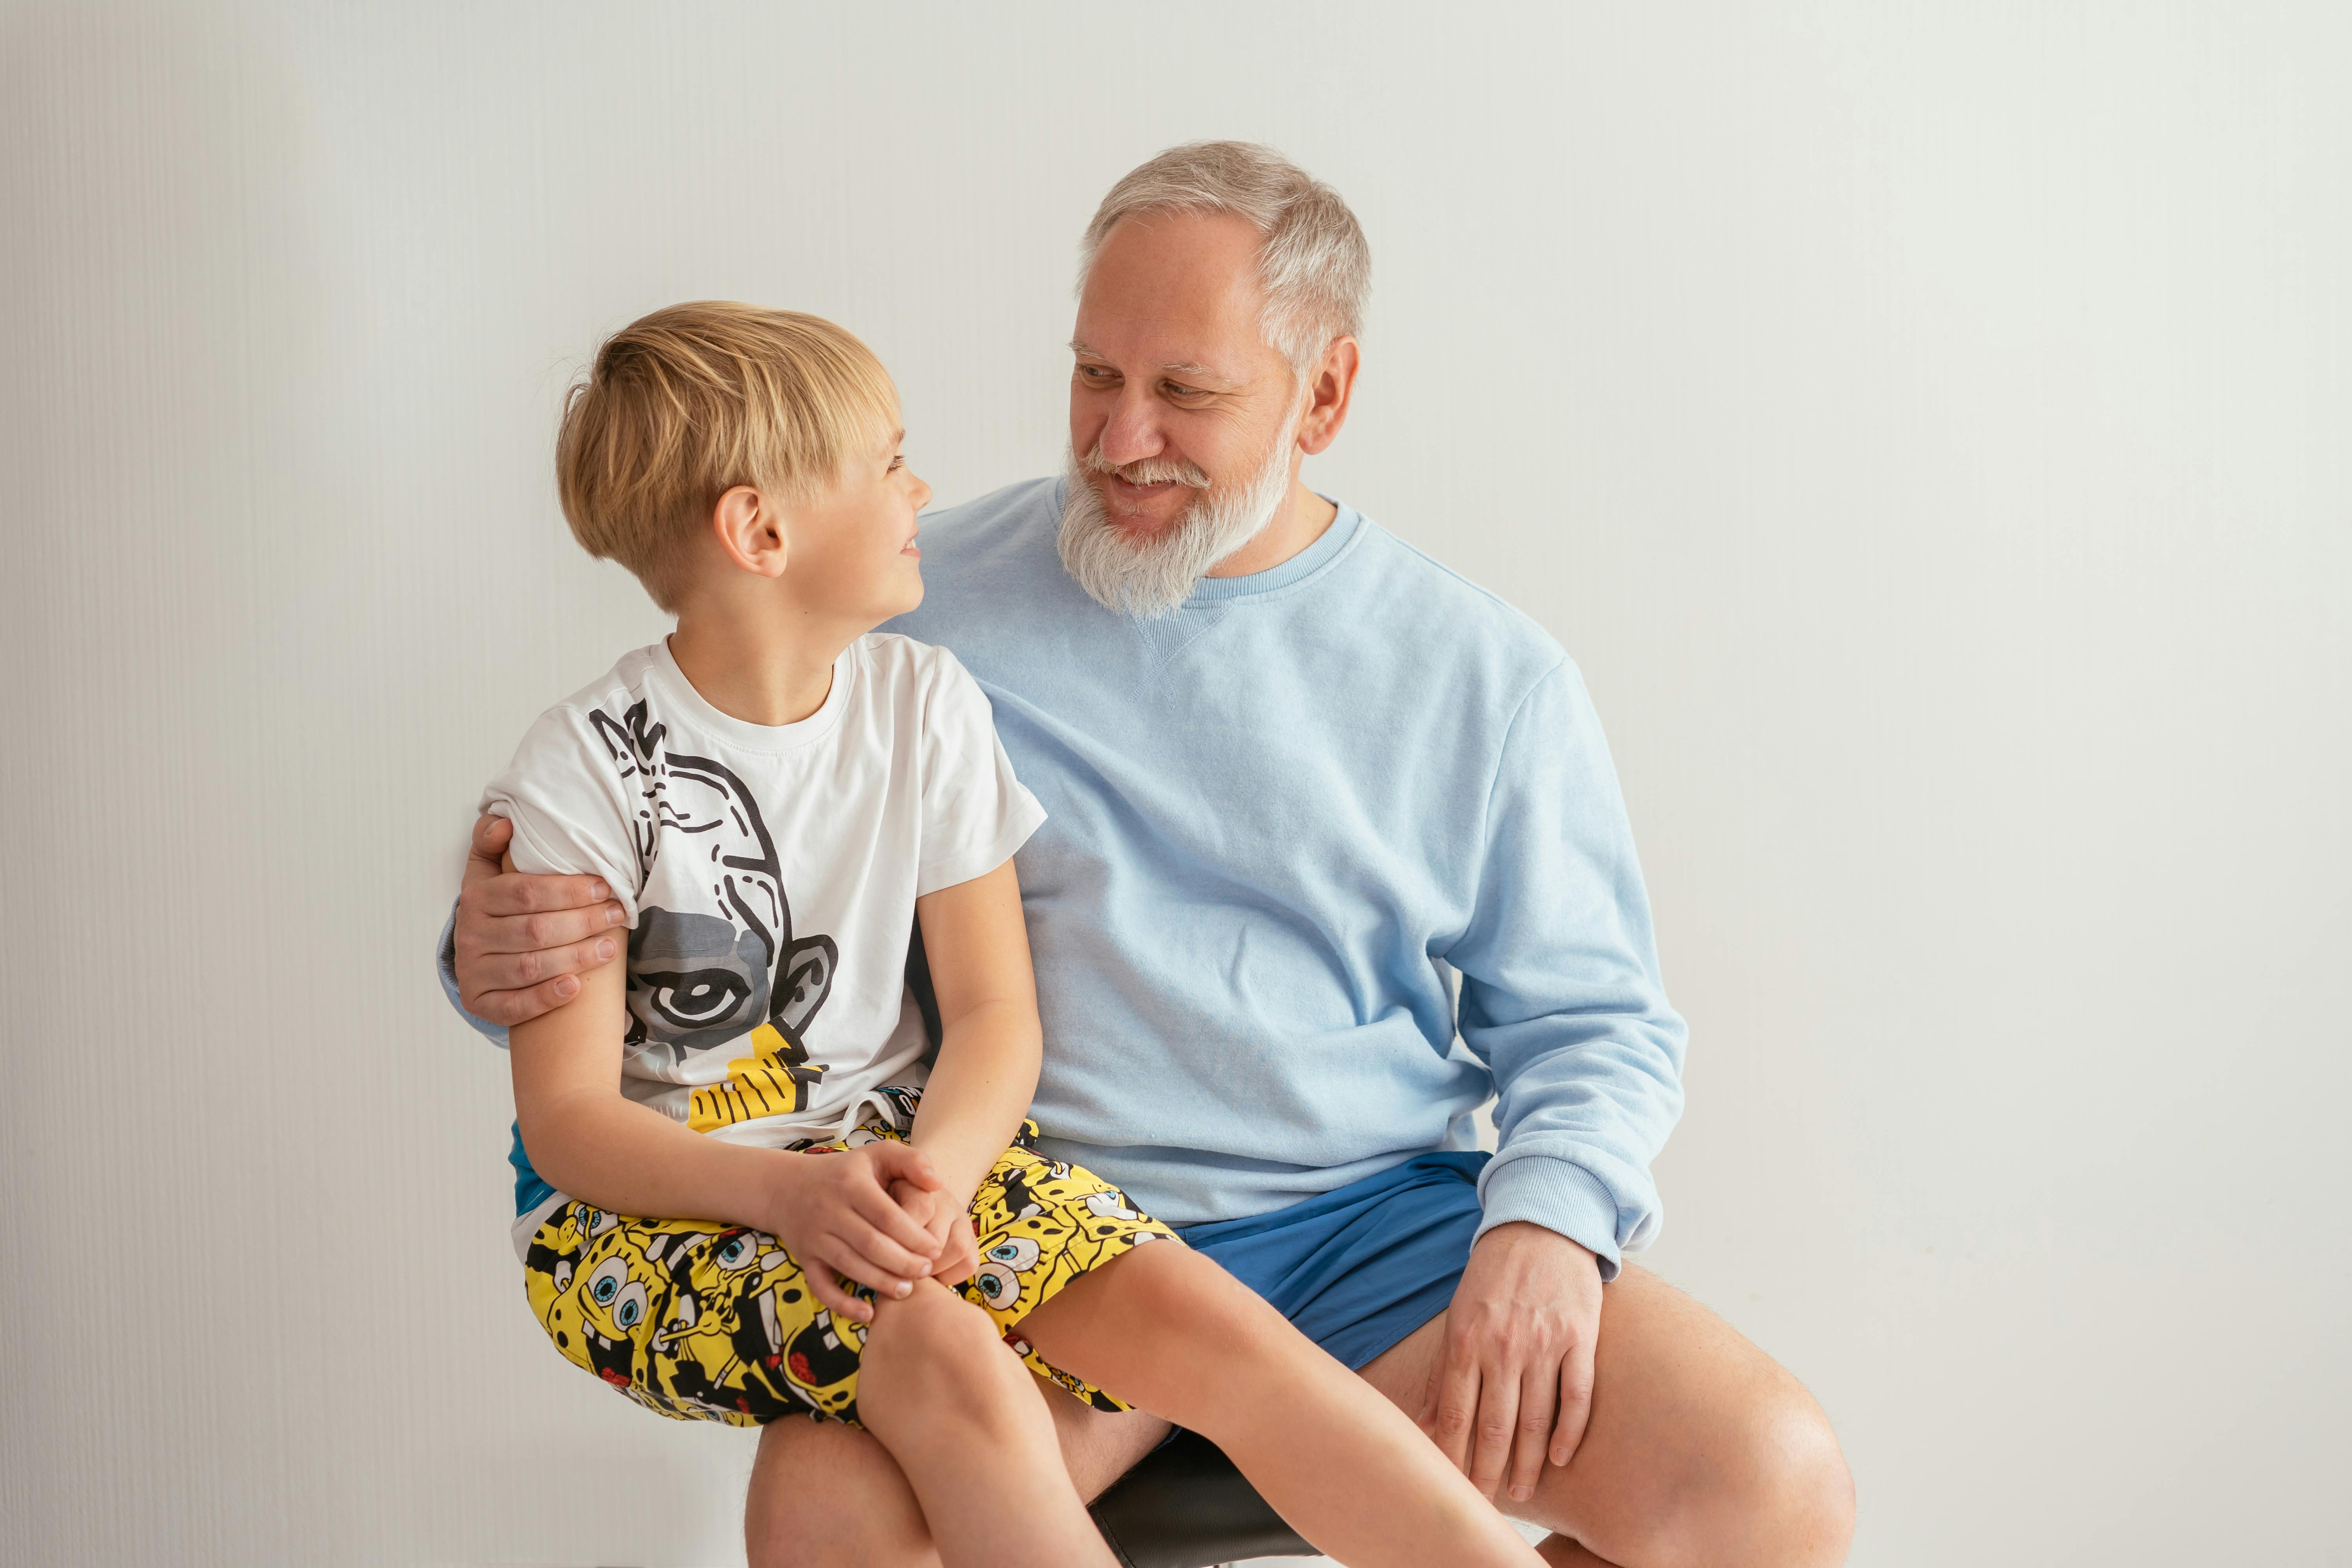 Young boy sitting on his grandfather's lap | Source: Pexels